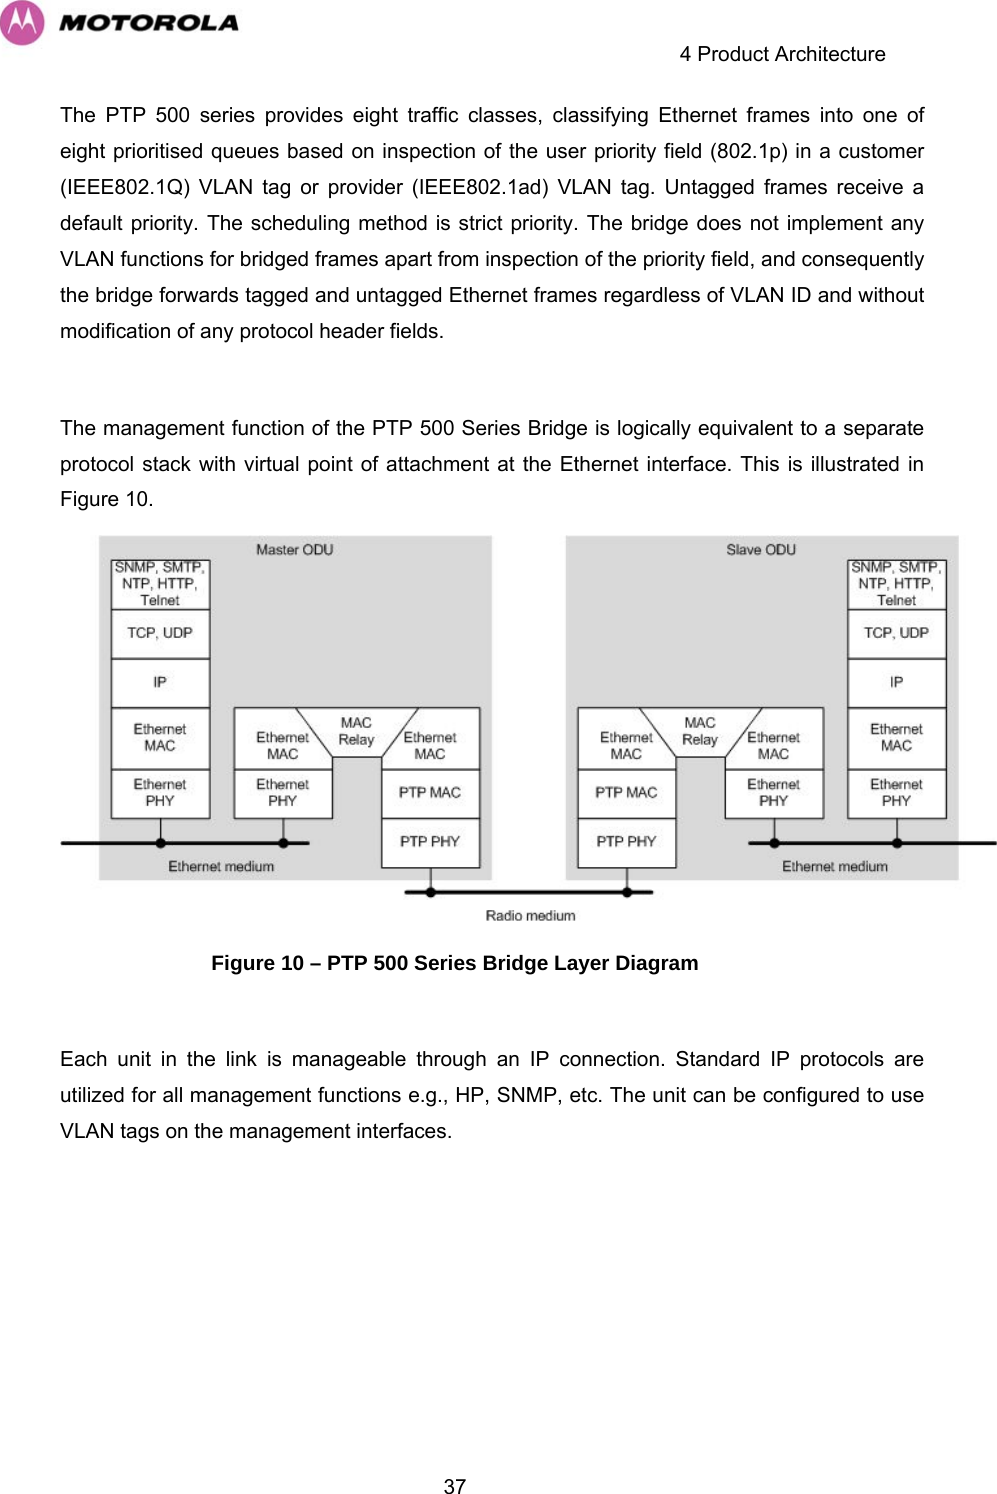     4 Product Architecture  37The PTP 500 series provides eight traffic classes, classifying Ethernet frames into one of eight prioritised queues based on inspection of the user priority field (802.1p) in a customer (IEEE802.1Q) VLAN tag or provider (IEEE802.1ad) VLAN tag. Untagged frames receive a default priority. The scheduling method is strict priority. The bridge does not implement any VLAN functions for bridged frames apart from inspection of the priority field, and consequently the bridge forwards tagged and untagged Ethernet frames regardless of VLAN ID and without modification of any protocol header fields.  The management function of the PTP 500 Series Bridge is logically equivalent to a separate protocol stack with virtual point of attachment at the Ethernet interface. This is illustrated in Figure 10.  Figure 10 – PTP 500 Series Bridge Layer Diagram  Each unit in the link is manageable through an IP connection. Standard IP protocols are utilized for all management functions e.g., HP, SNMP, etc. The unit can be configured to use VLAN tags on the management interfaces. 